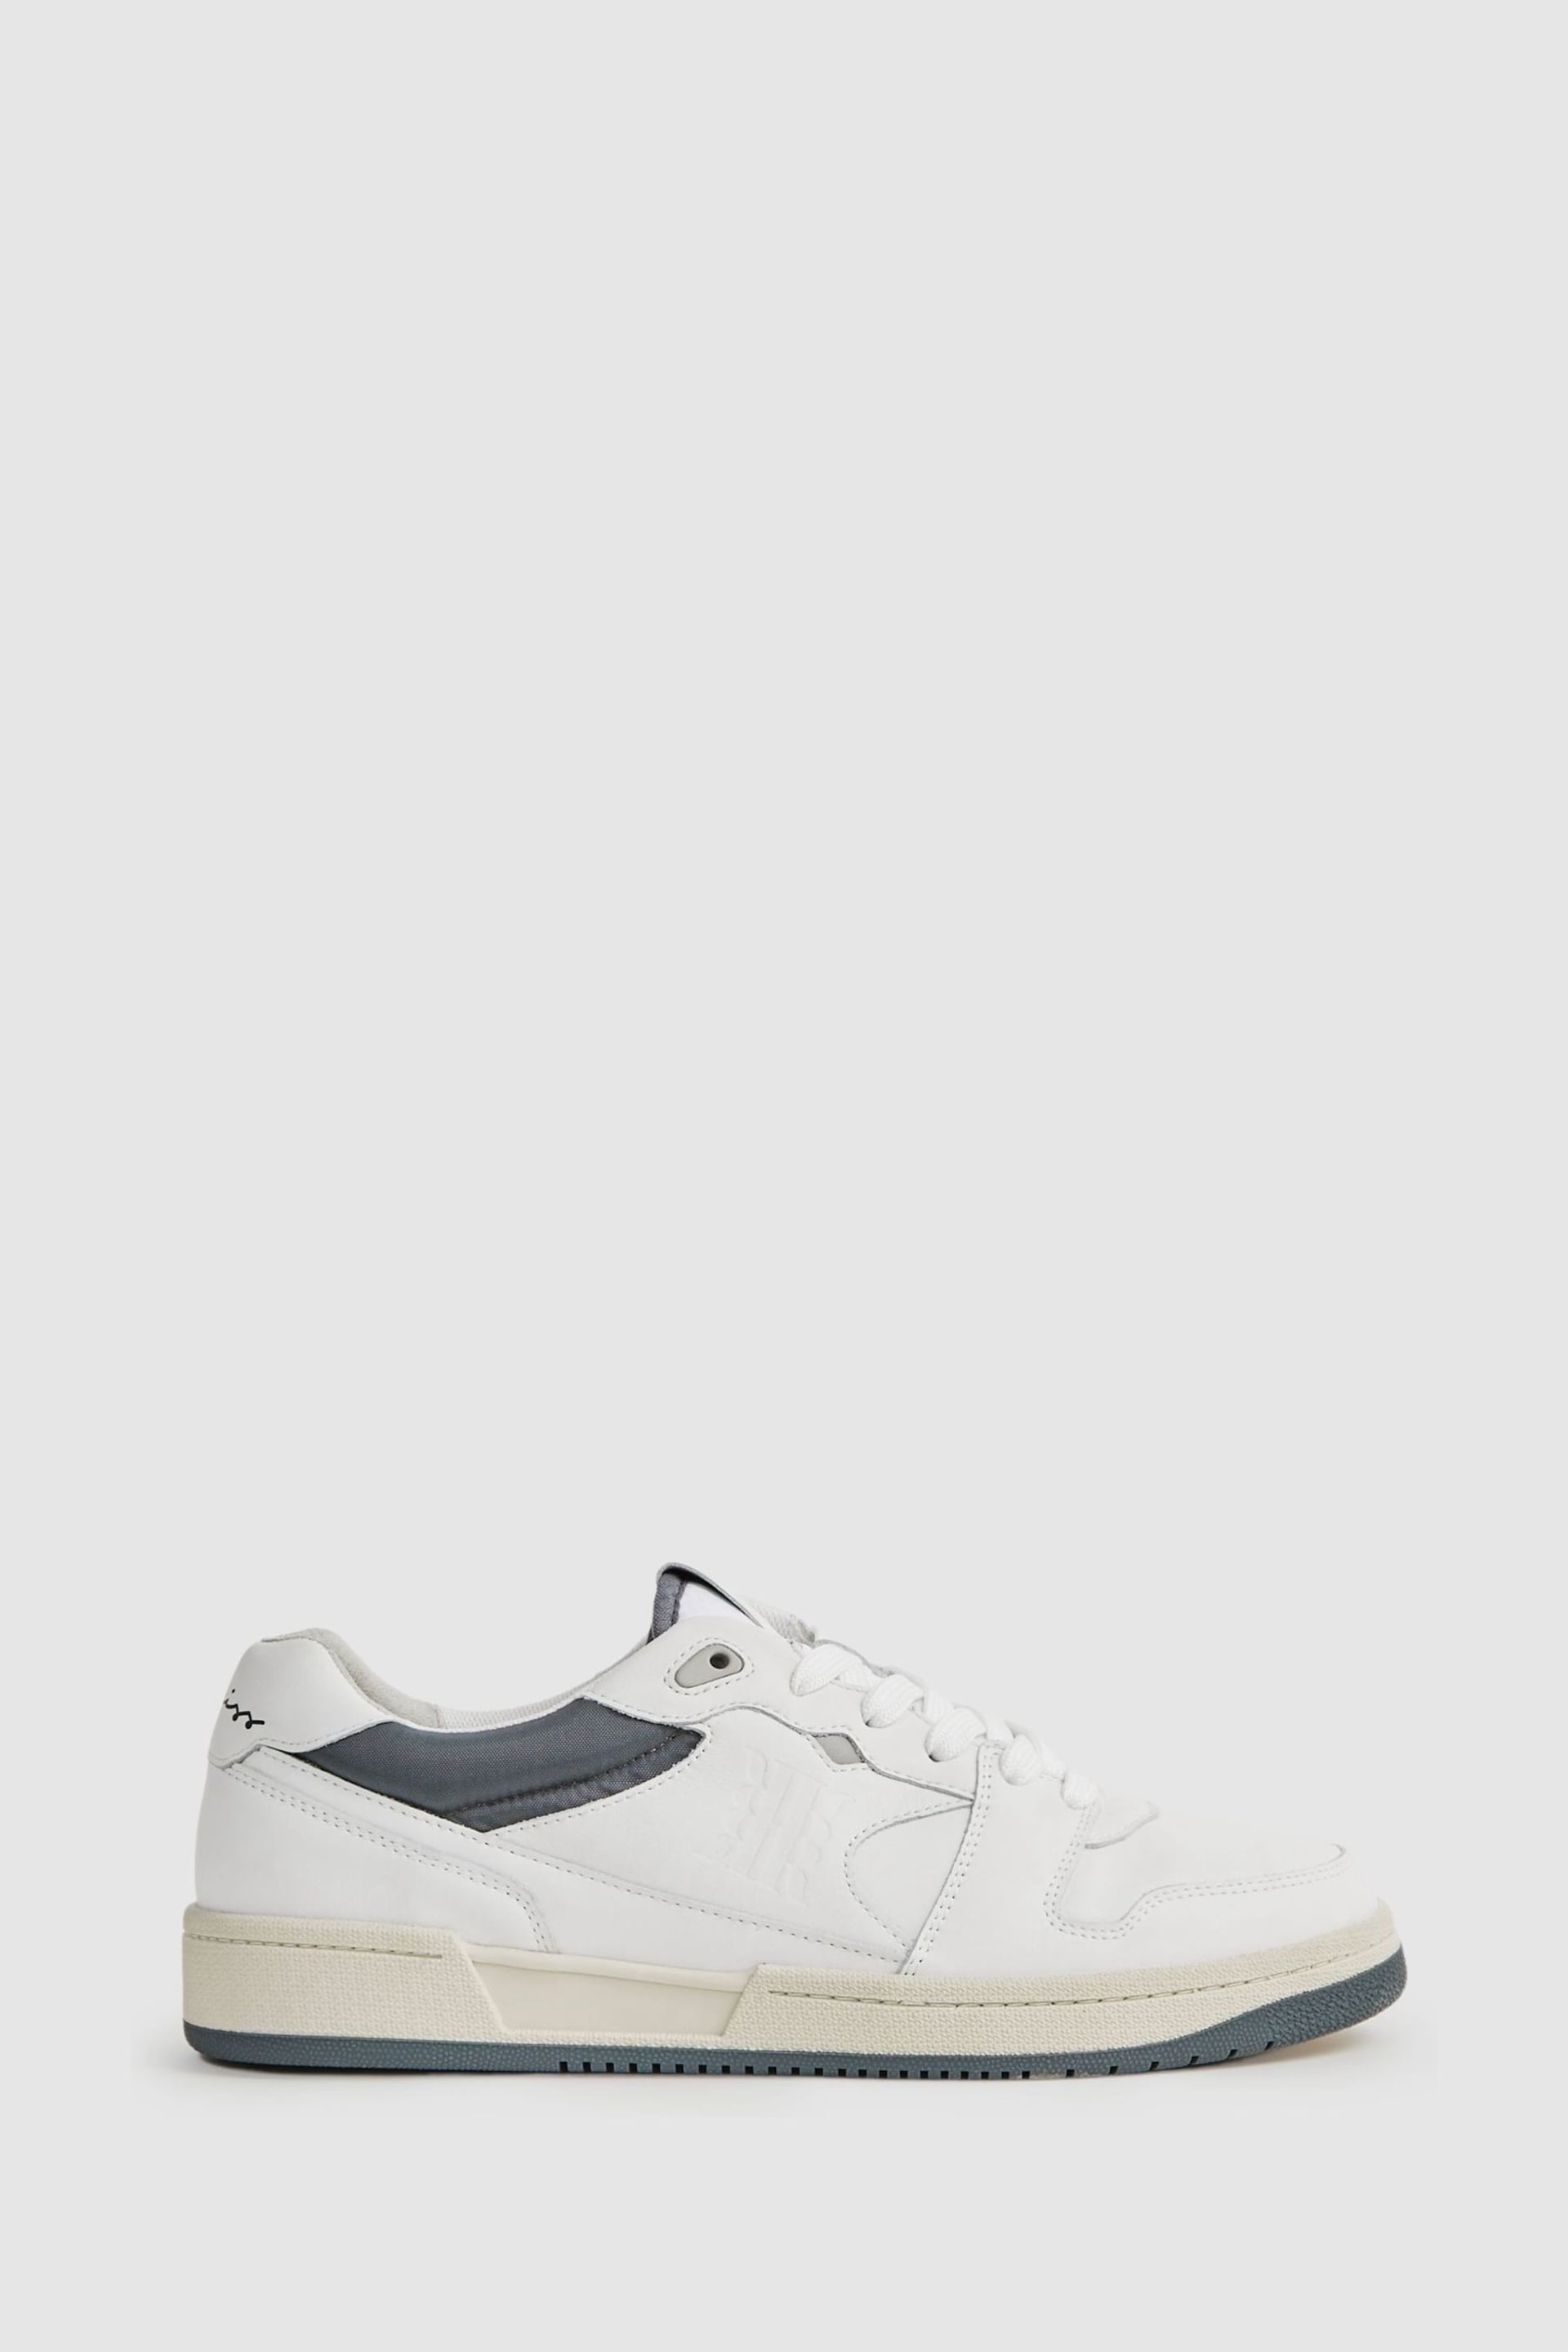 Reiss White Astor Leather Lace-Up Trainers - Image 1 of 5